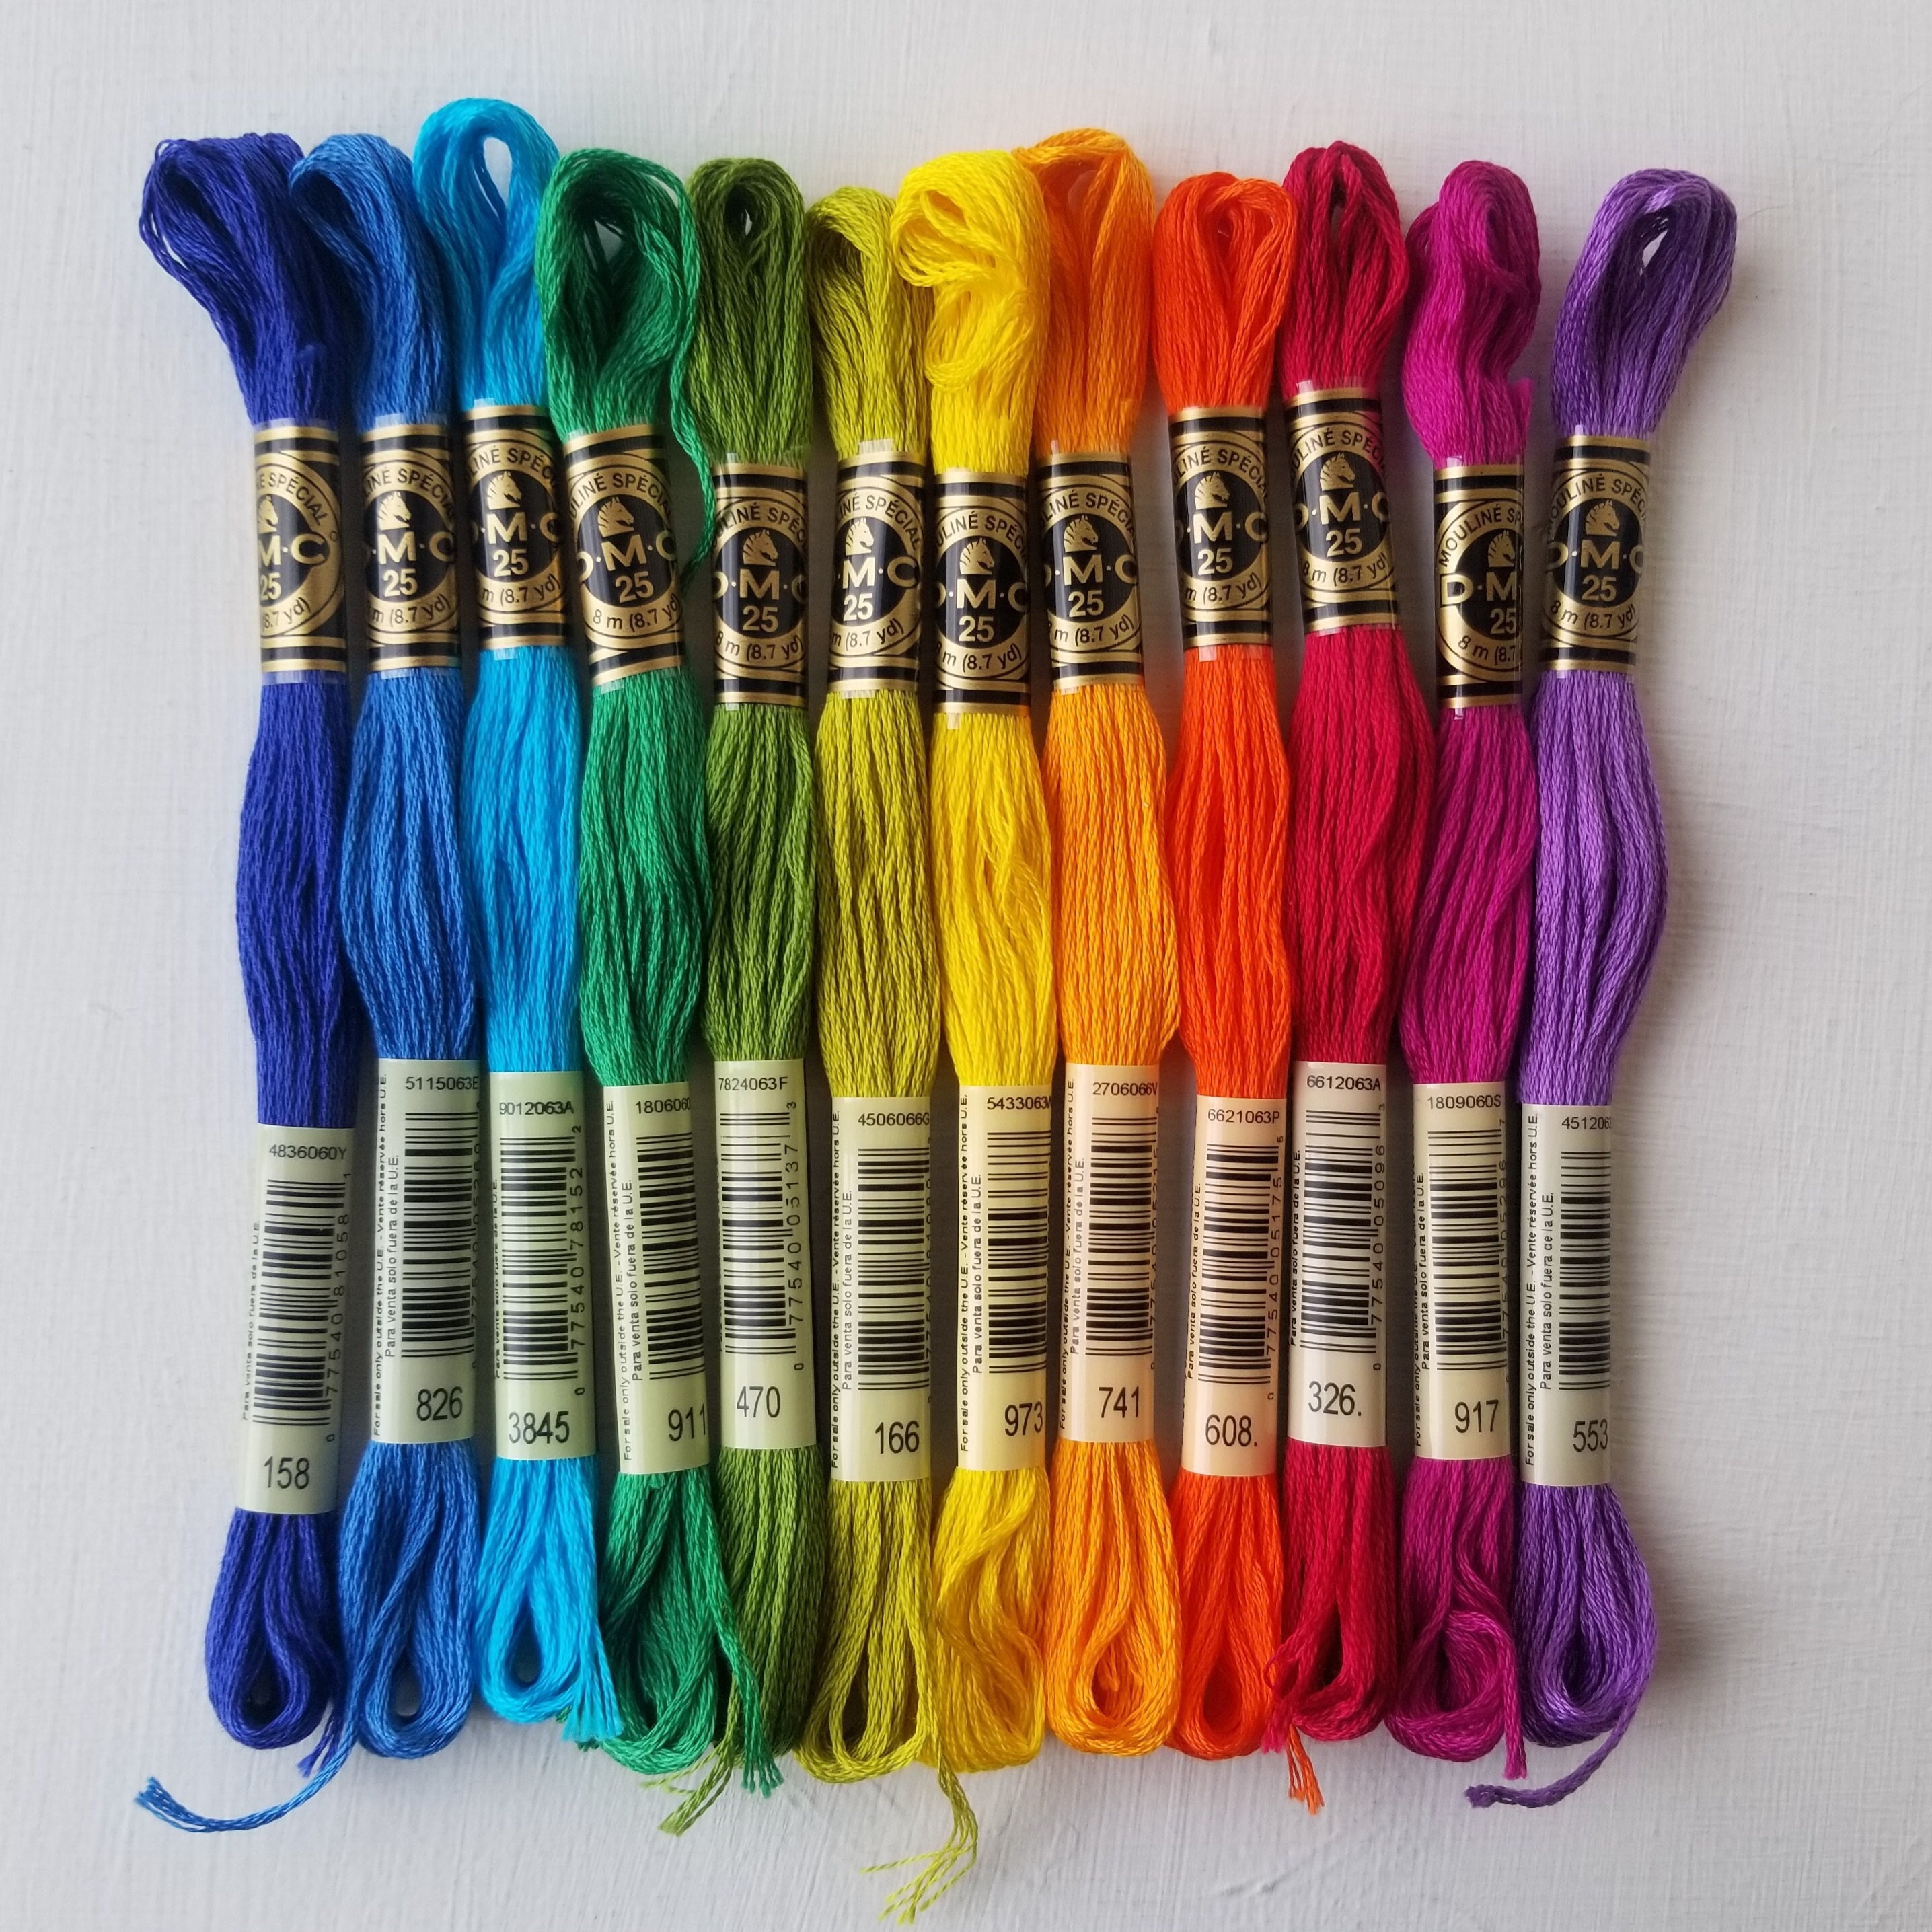 Other Embroidery Floss - DMC